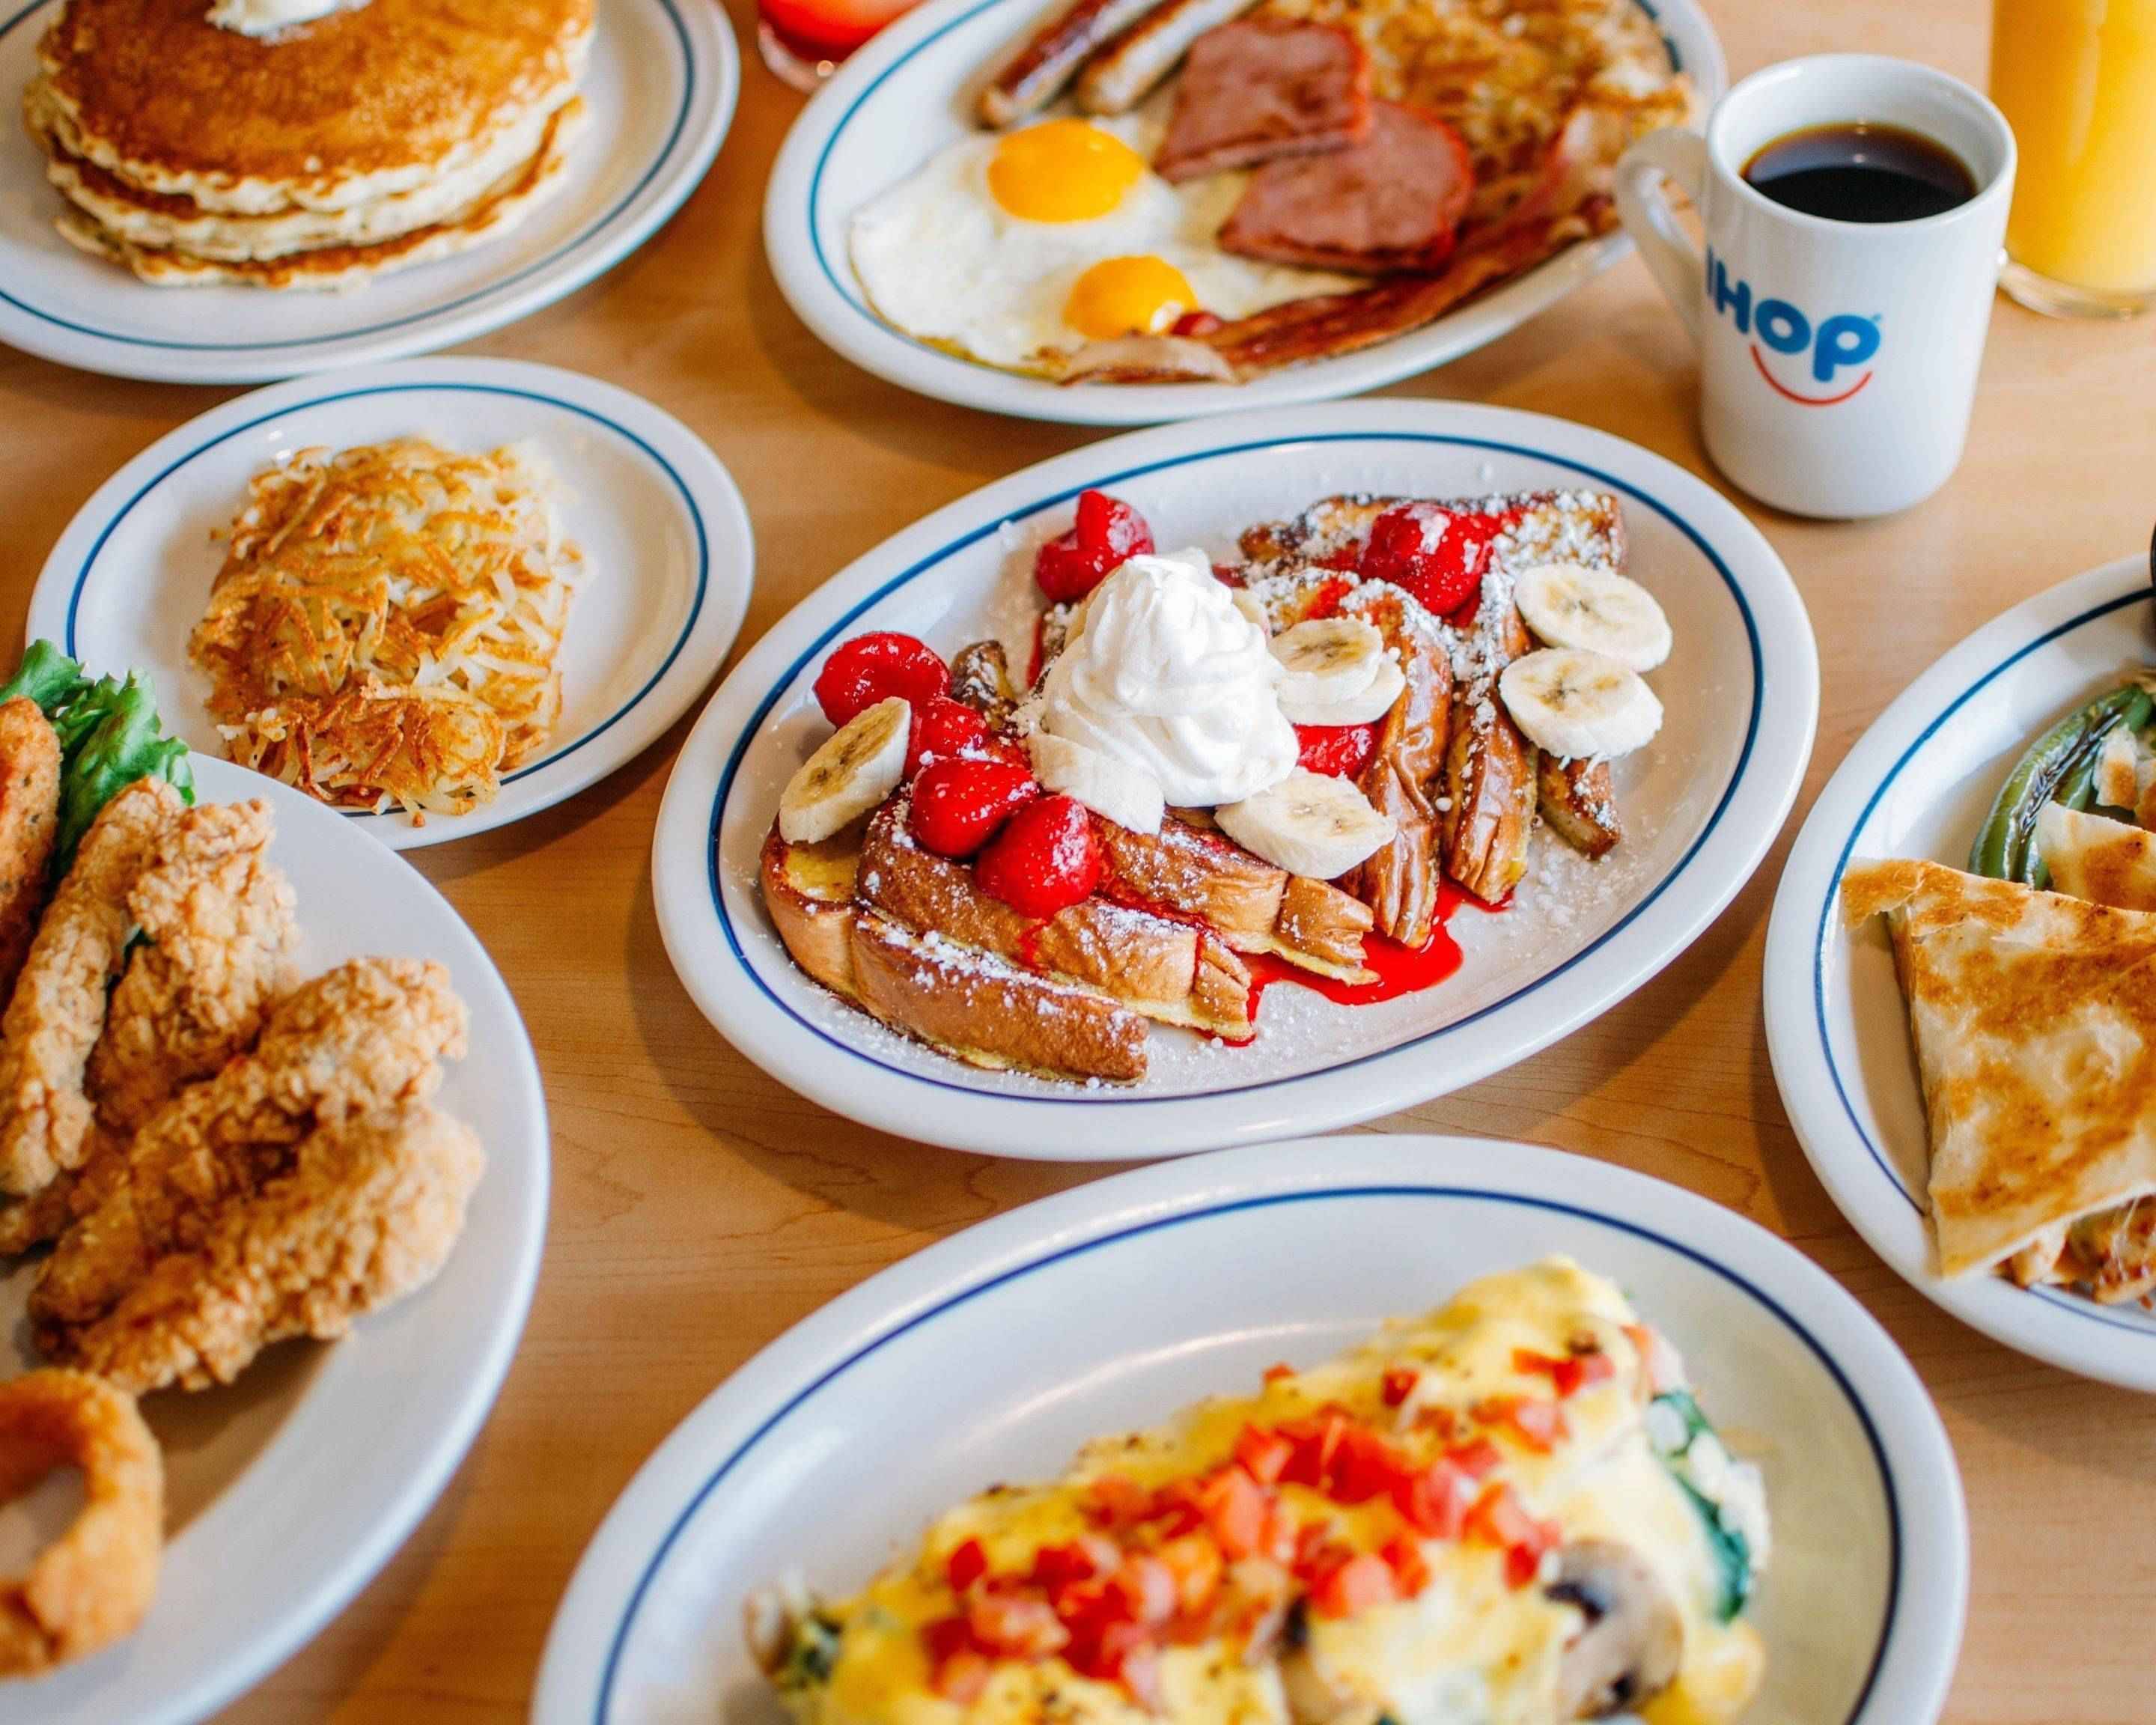 IHOP Biscuit menu celebrates sweet and savory flavors any time of day